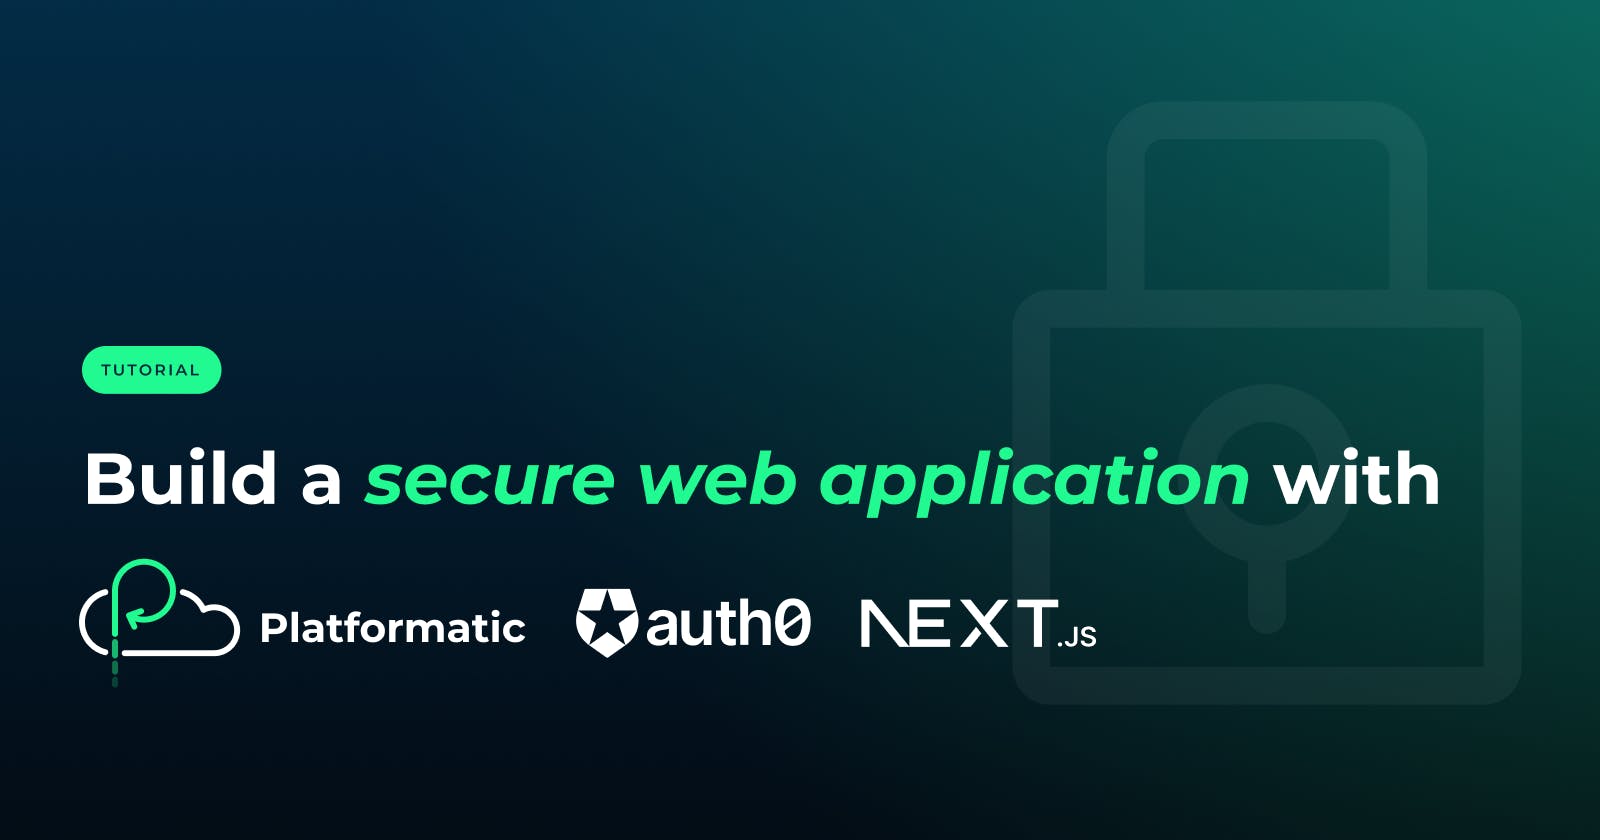 Build a secure web application with Platformatic, Auth0 and Next.js